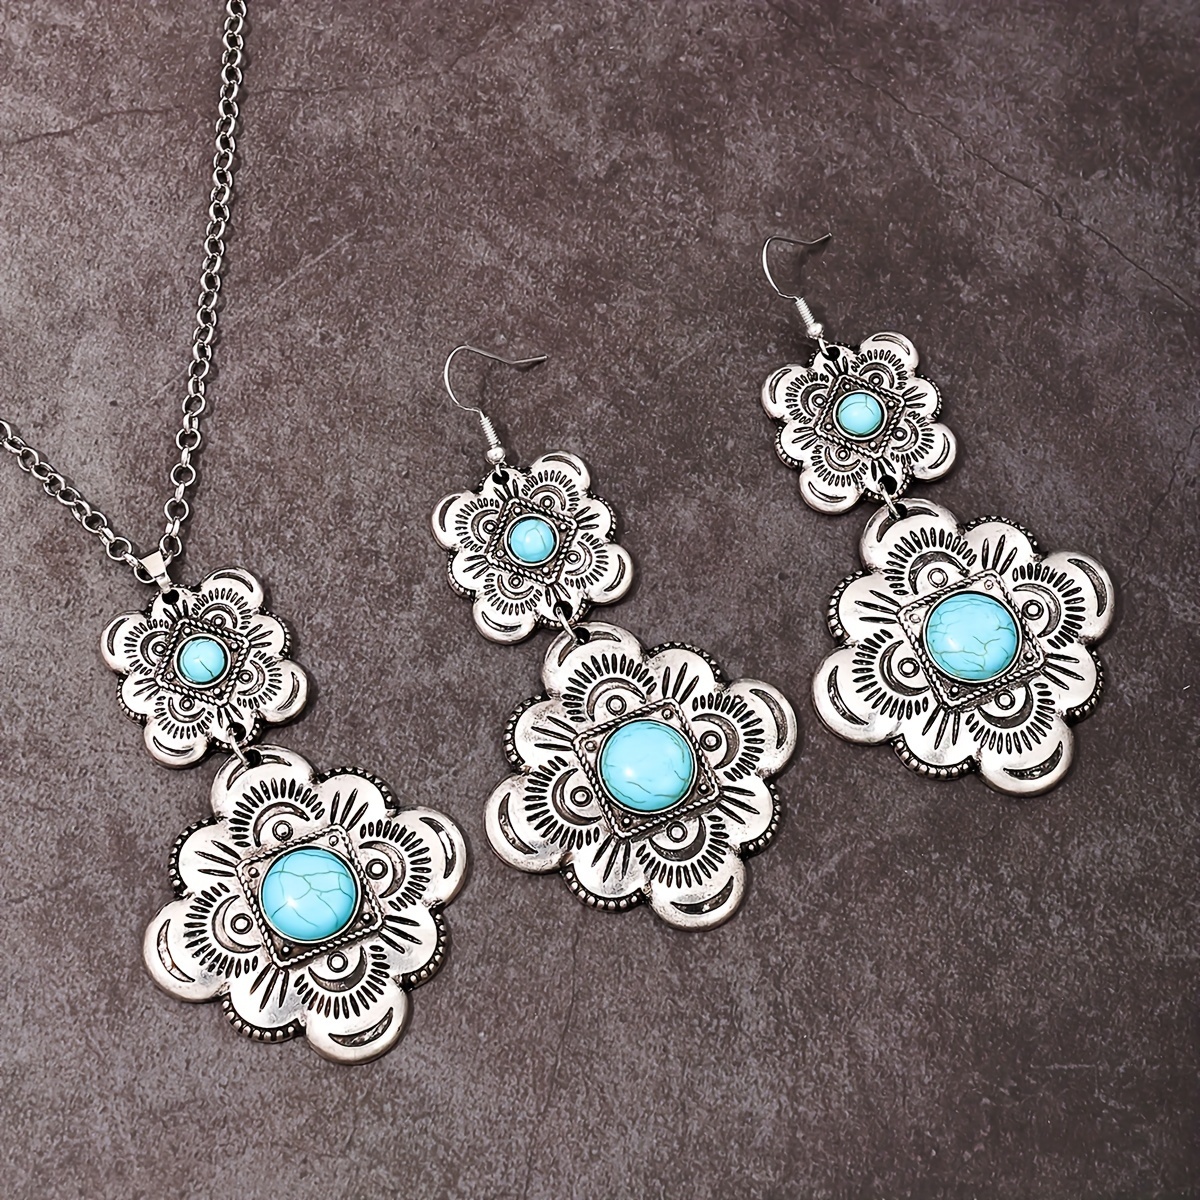 

1-piece Set Bohemian Vintage Style Silvery Floral Jewelry With Turquoise Accents, Elegant Retro Fashion Necklace And Earrings For Women